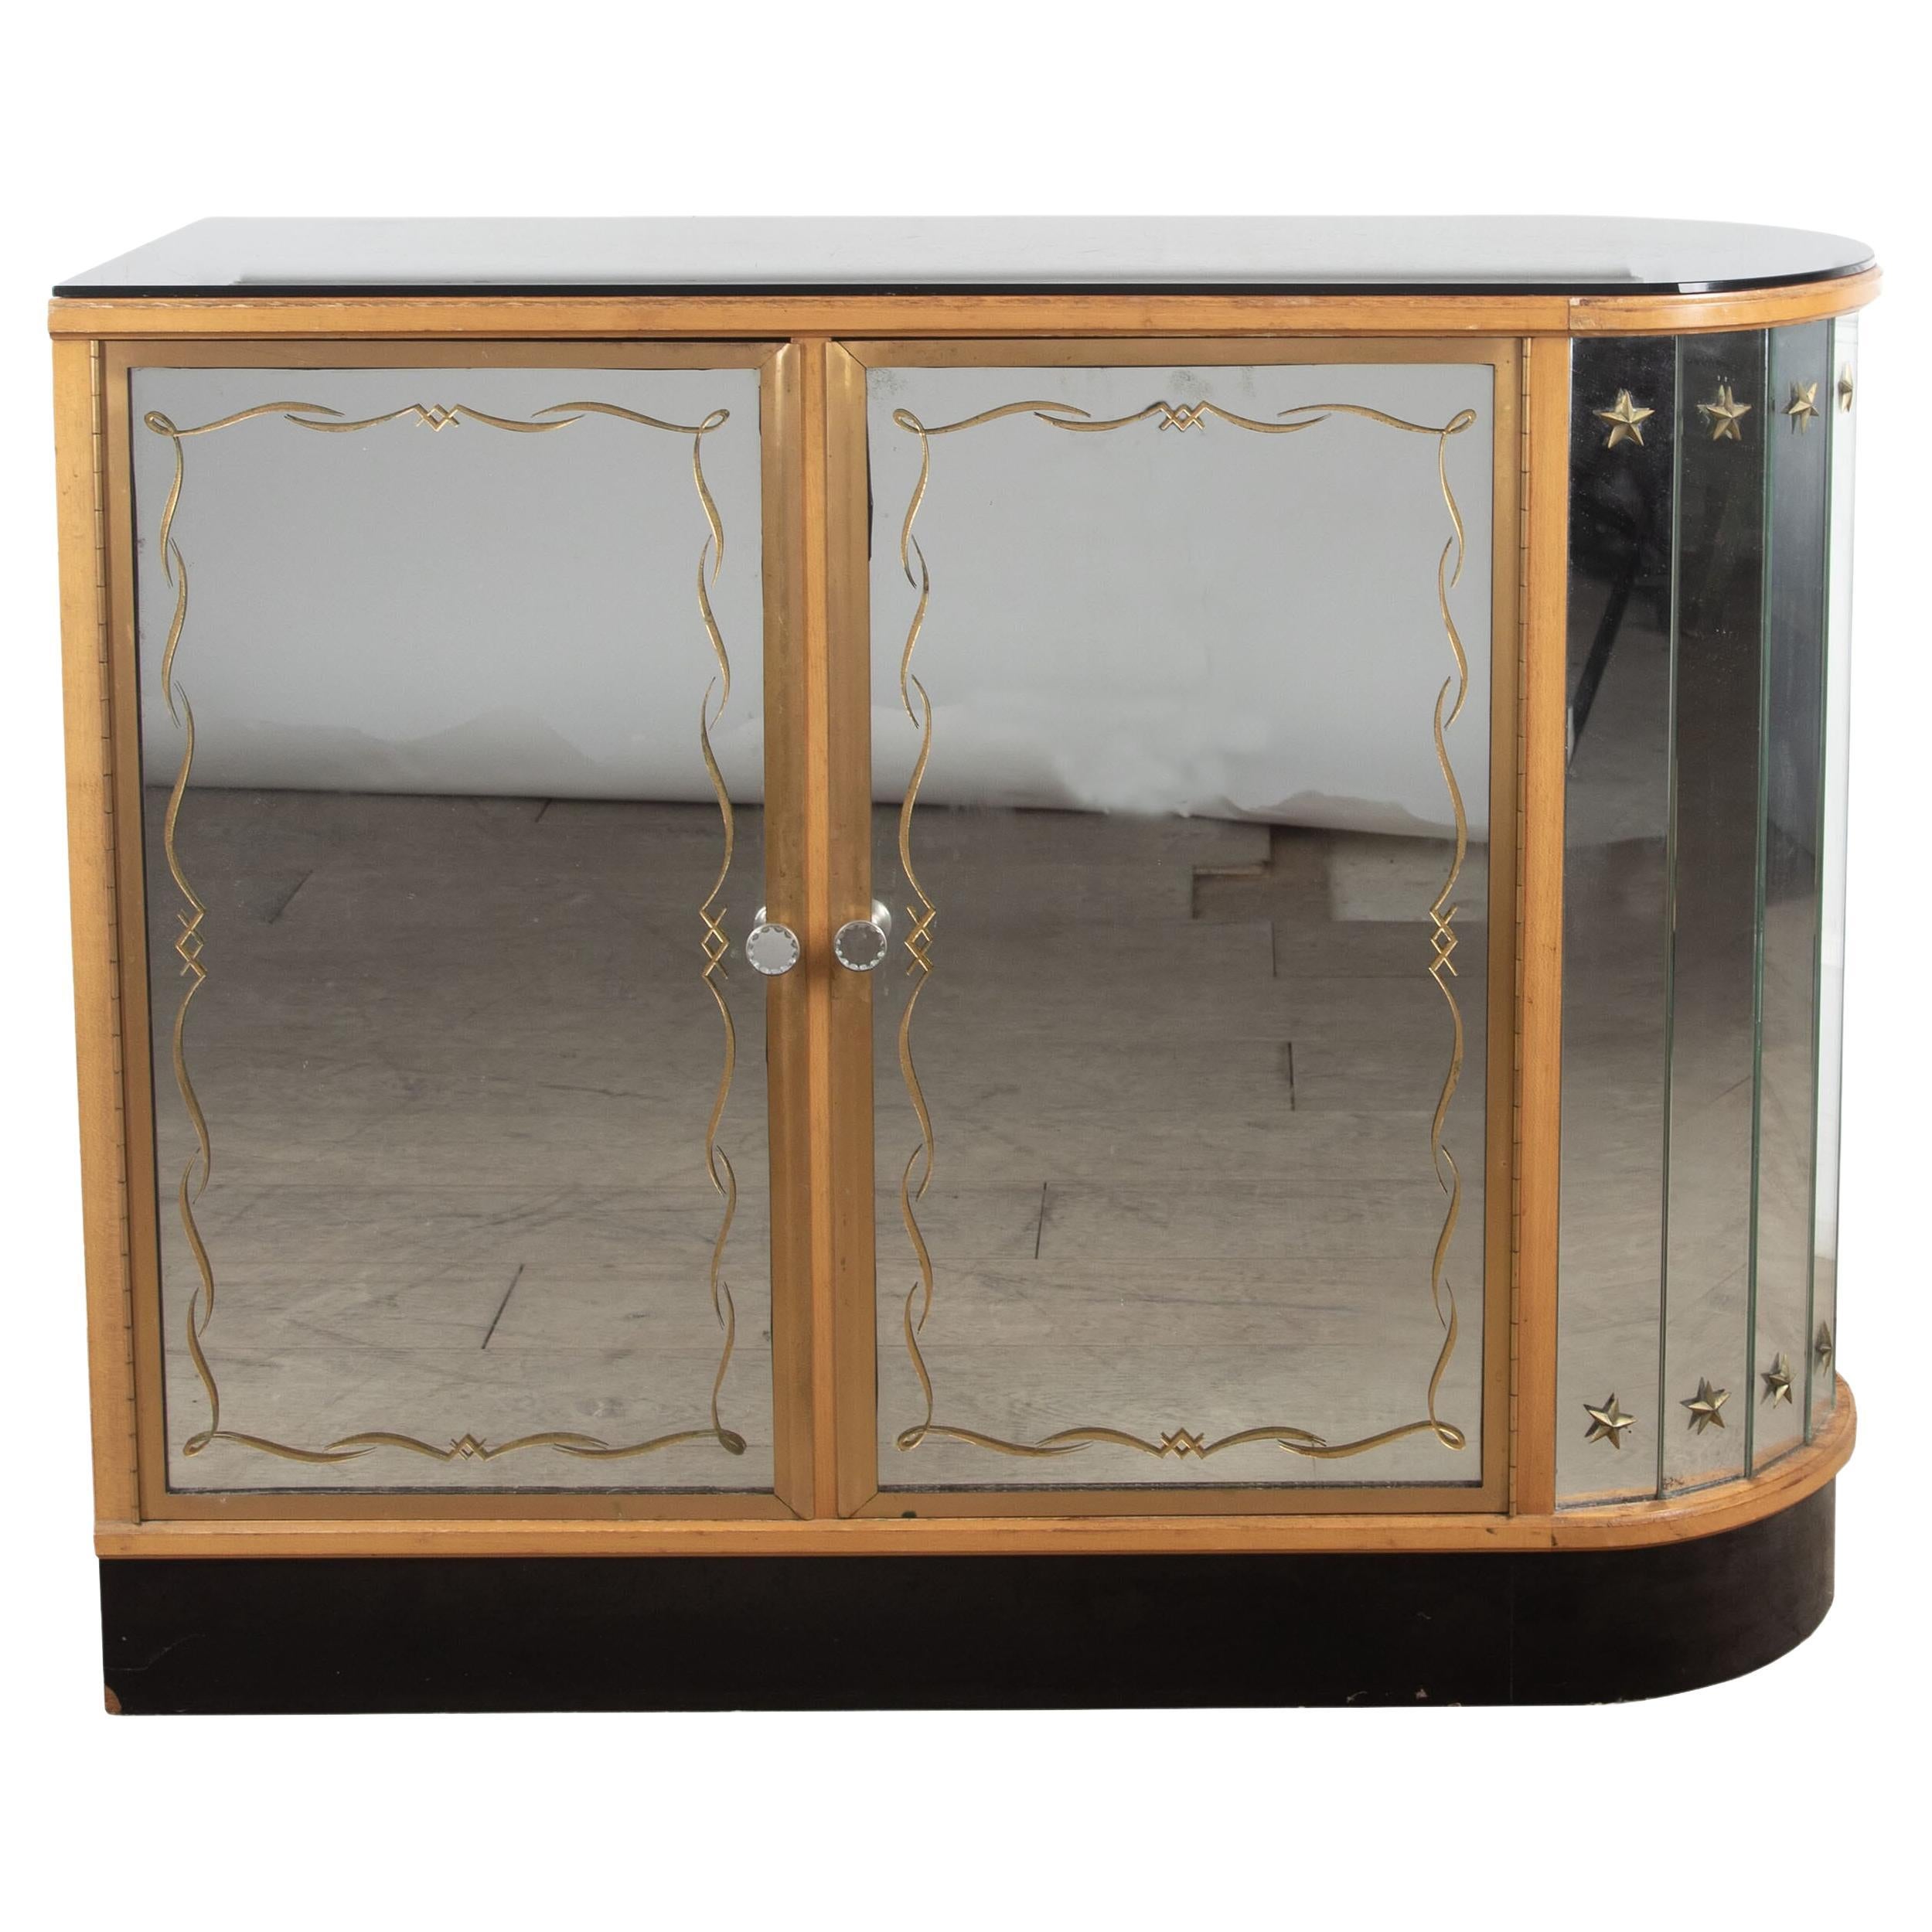 20th Century Glazed Cocktail Cabinet in the Style of Renee Drouet